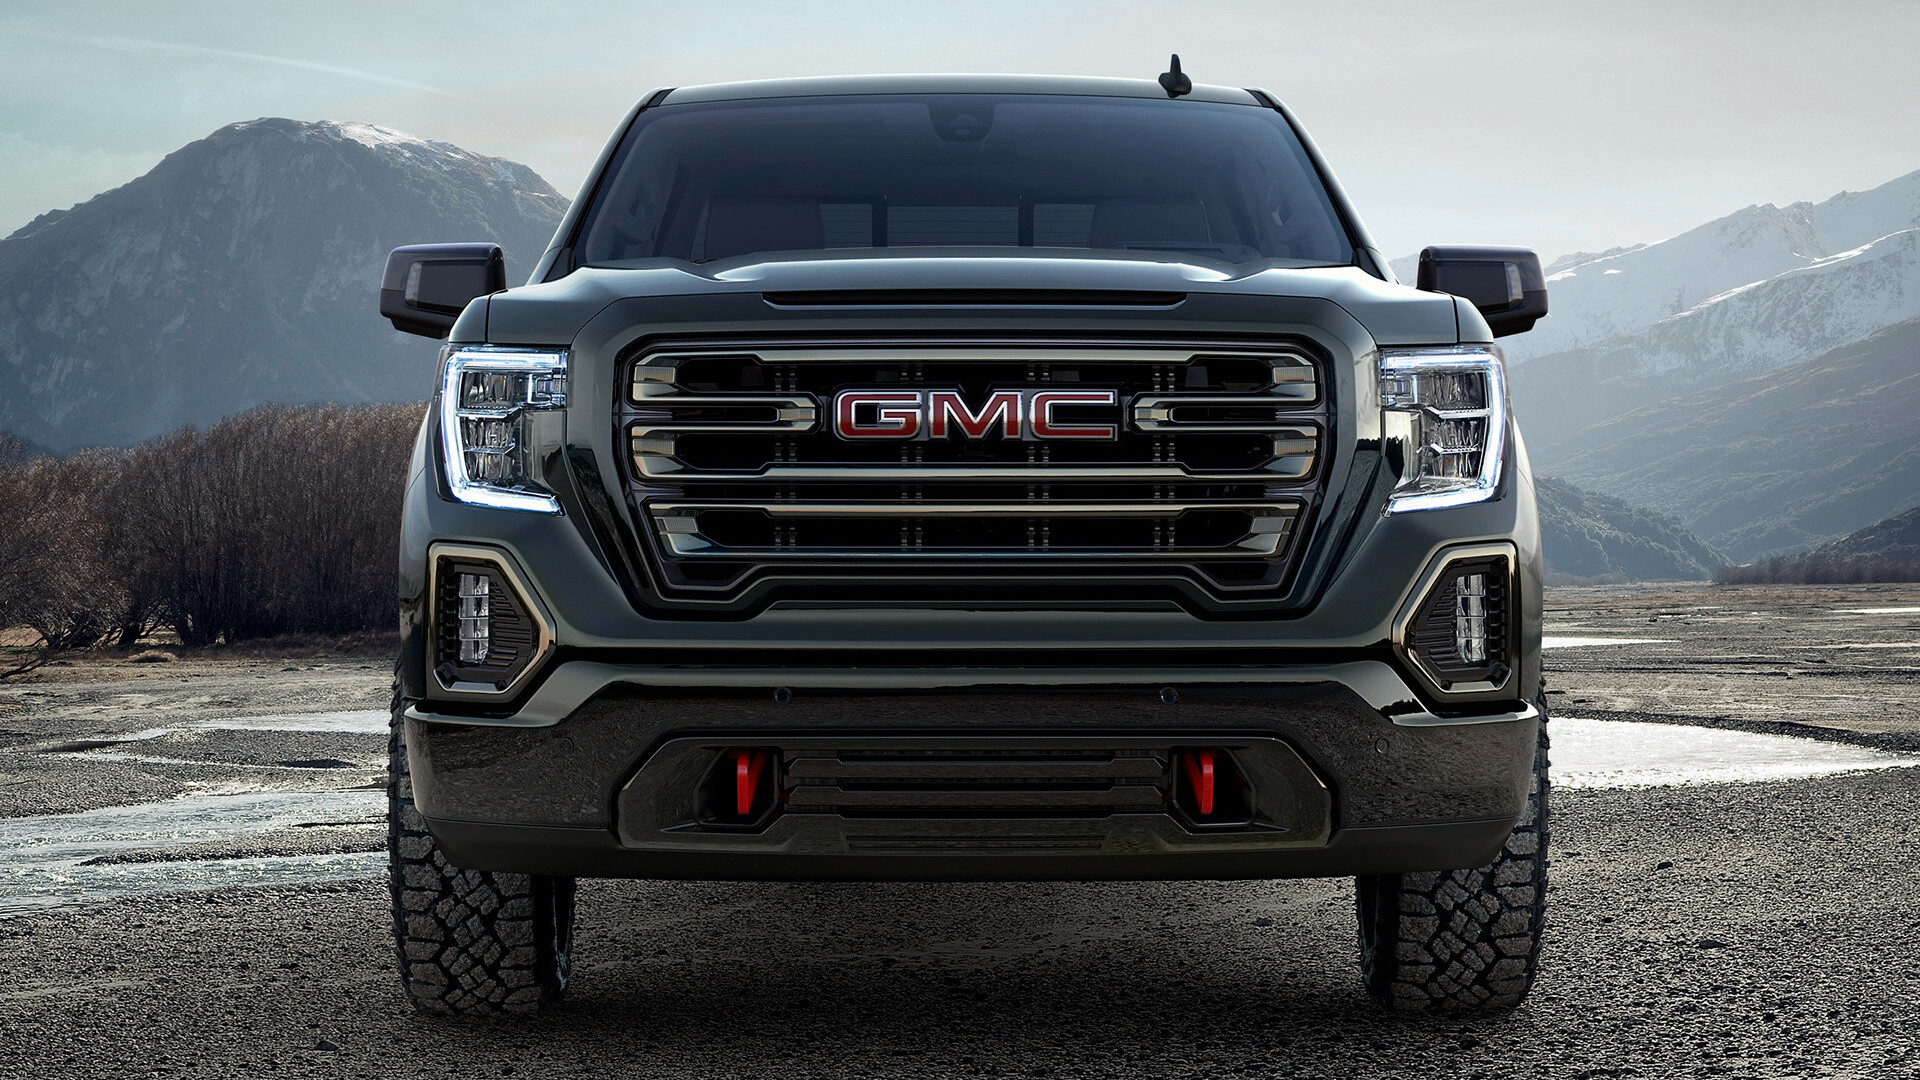 GMC Sierra: 2019 AT4 Crew Cab, A unique formula of authentic off-road capability and innovative technology. 1920x1080 Full HD Wallpaper.